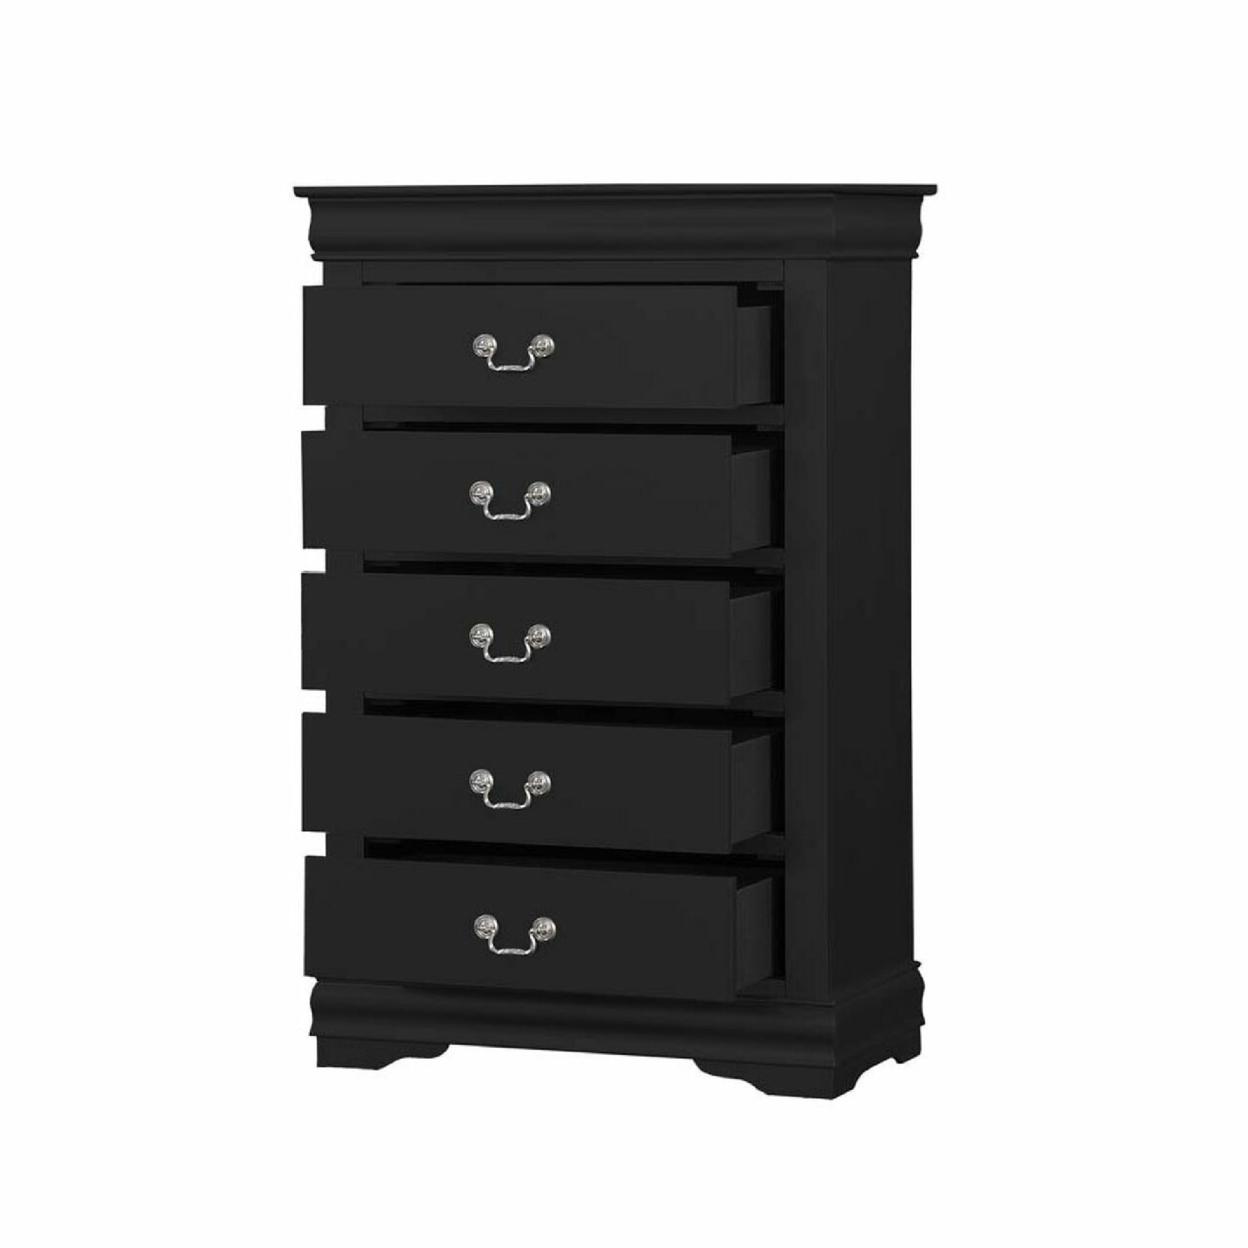 Traditional Style Wooden Chest With Five Drawers, Black- Saltoro Sherpi